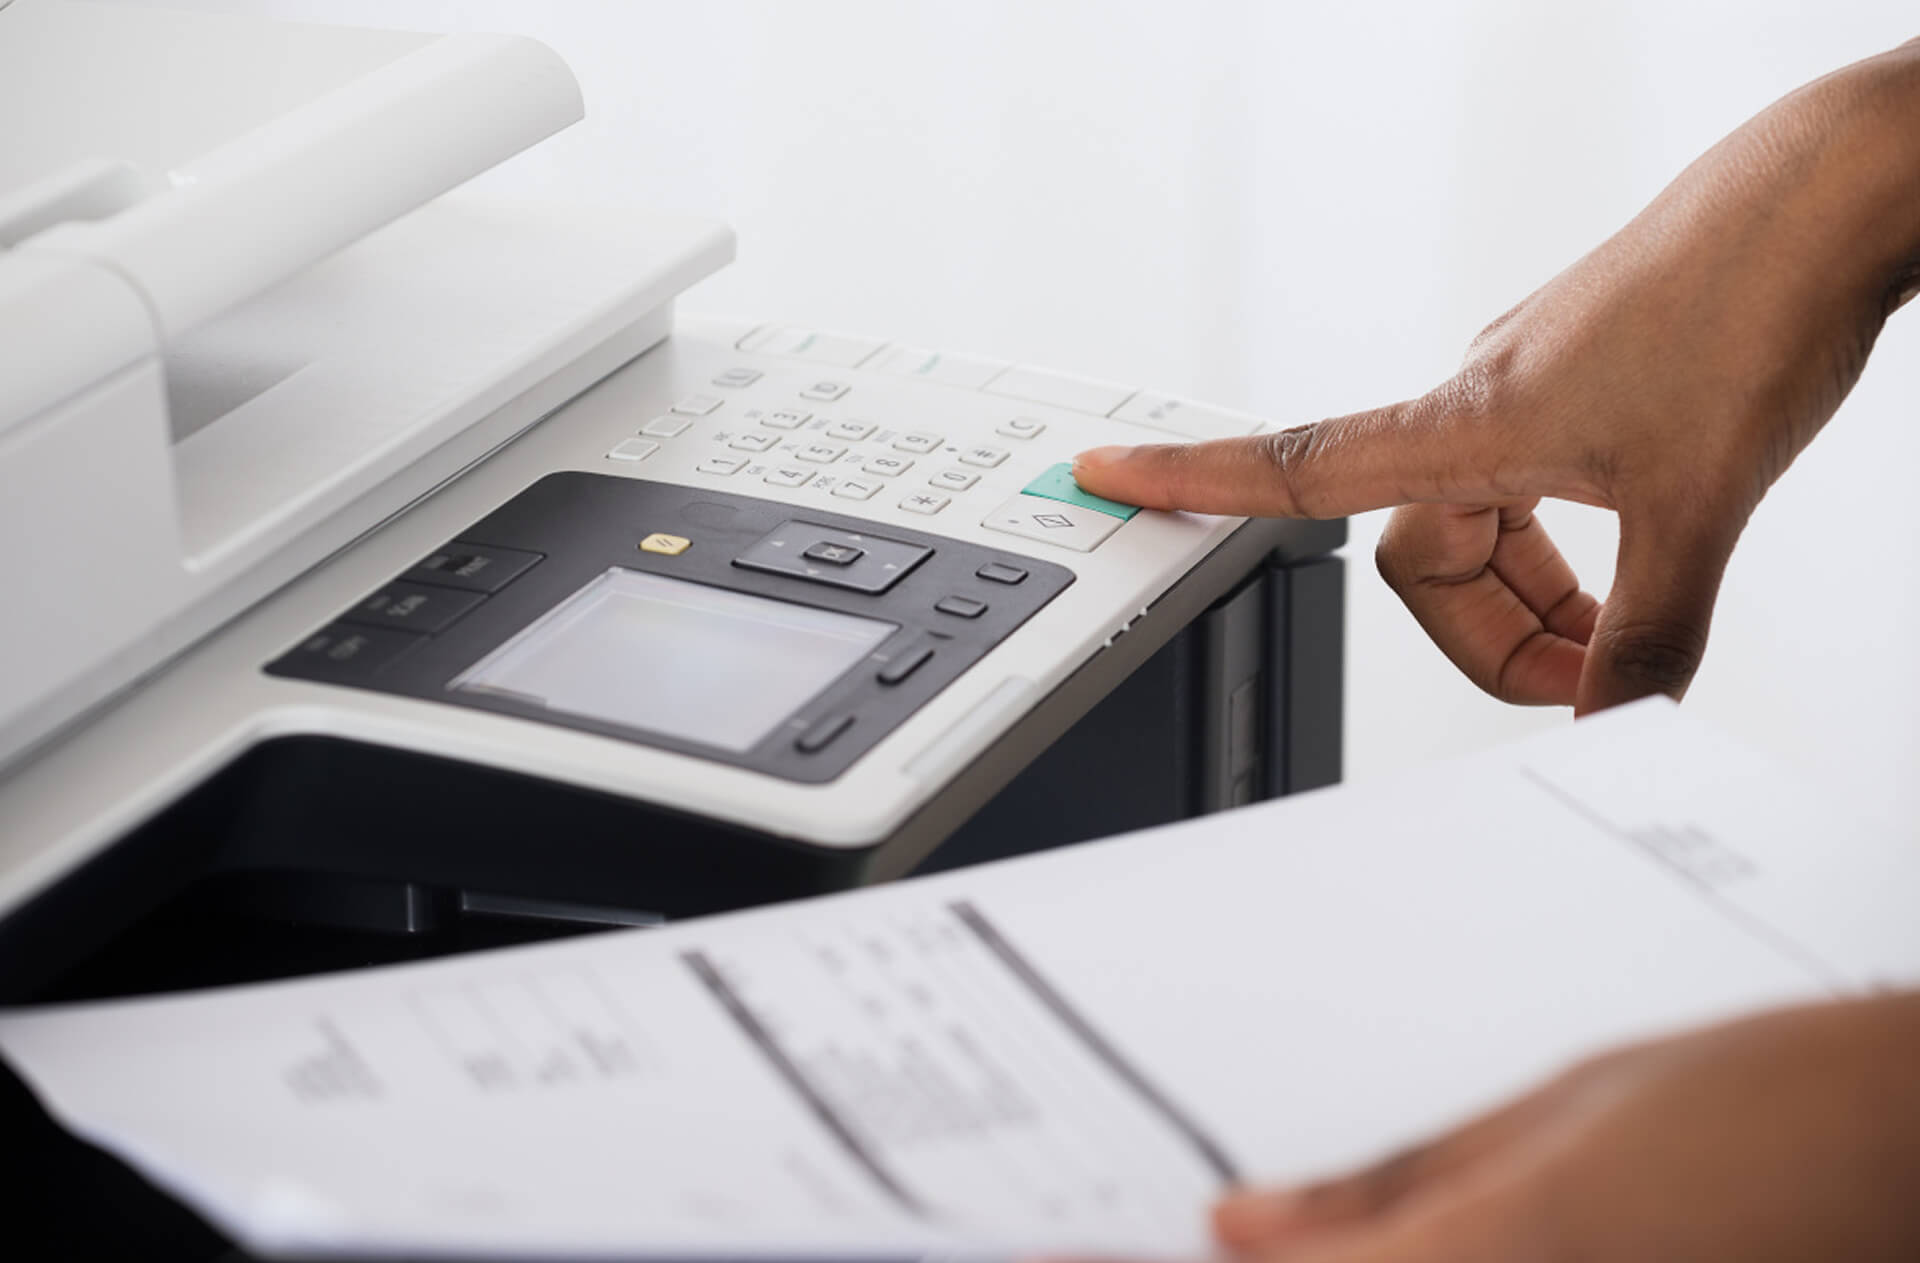 Lexmark Printers for Small and Medium Business